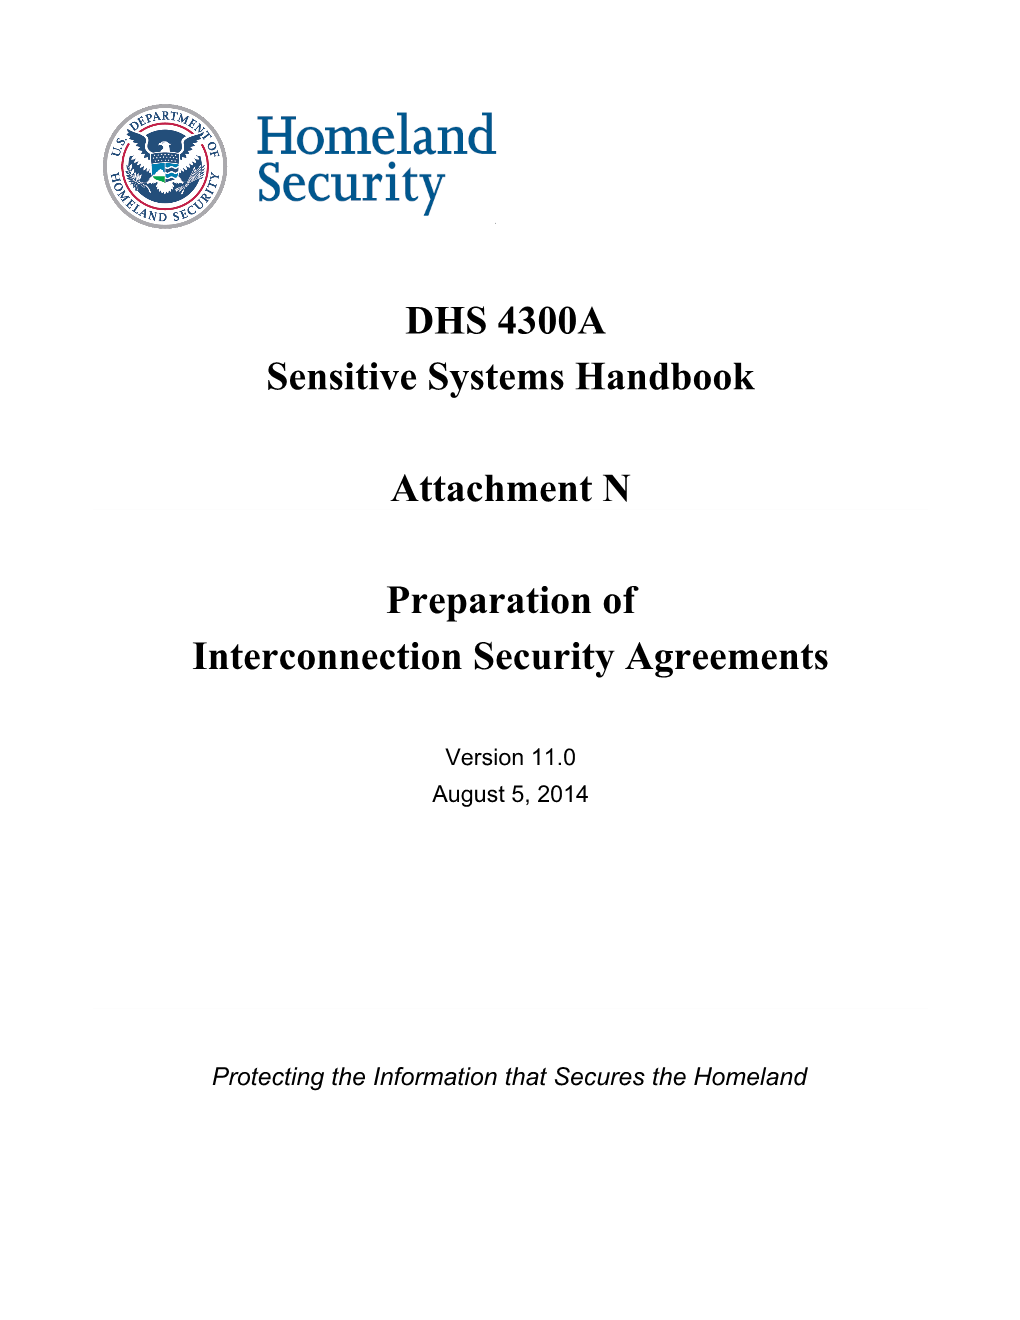 DHS 4300 Sensitive Systems Handbookattachment N Interconnection Security Agreements